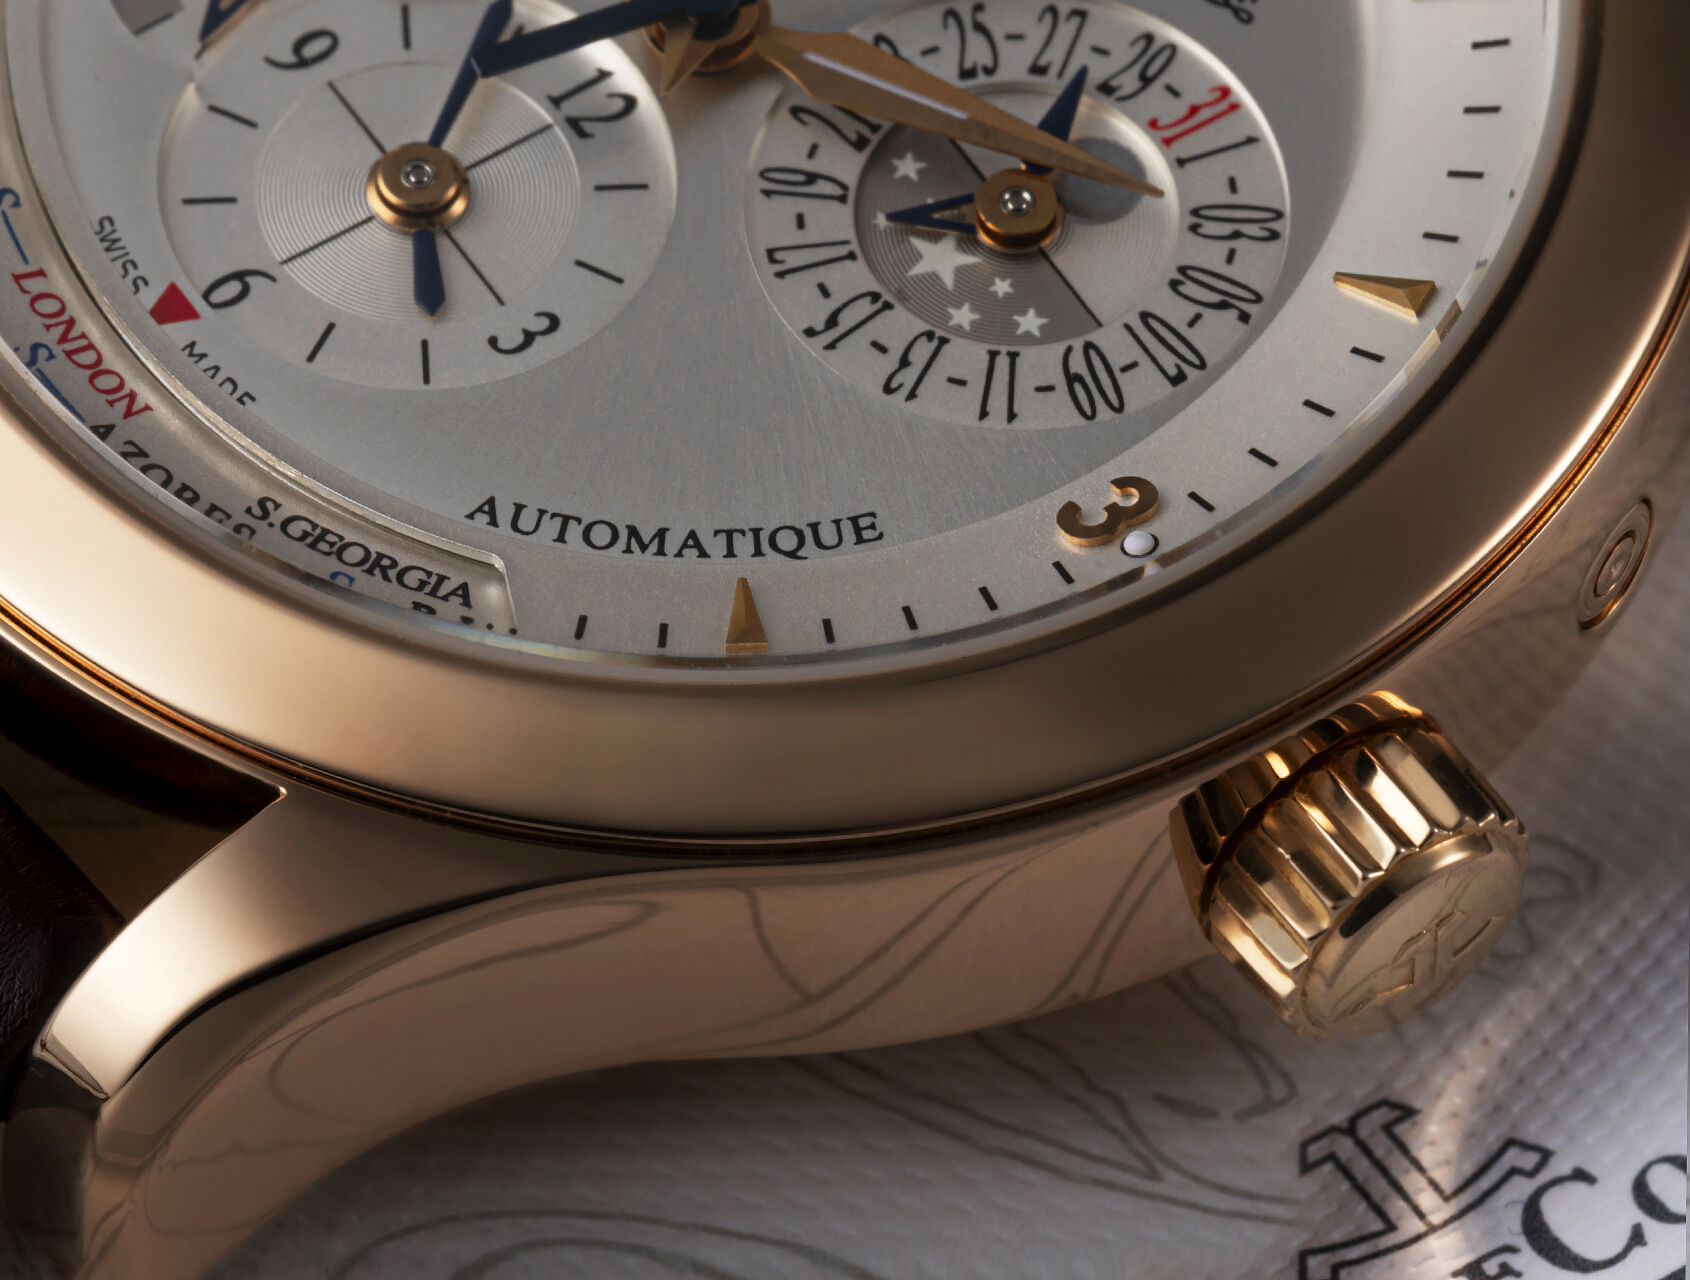  | Master Geographic | Jaeger-leCoultre Master Geographic